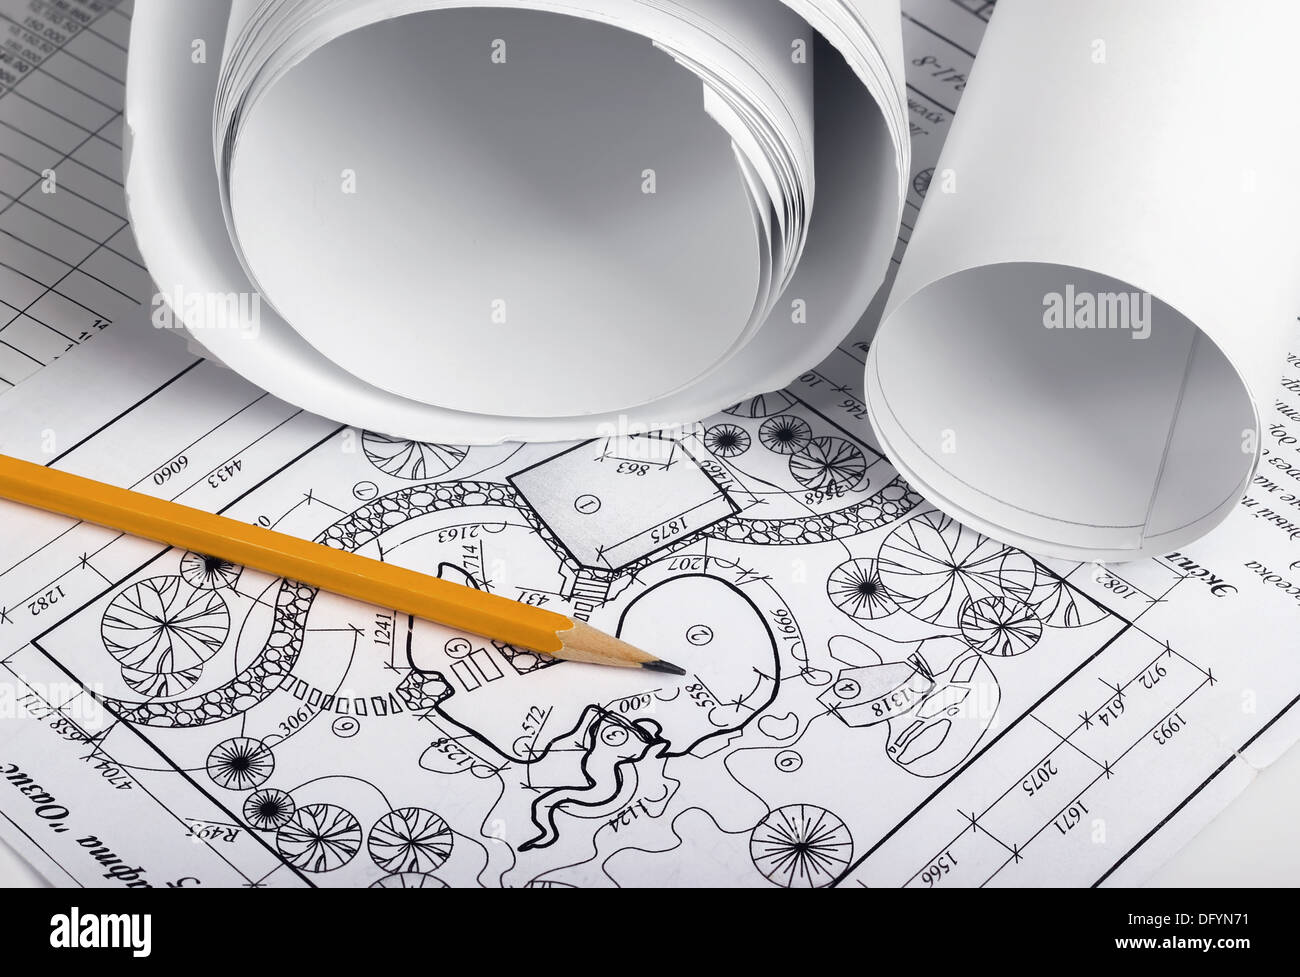 Rolls of drawings with elements of landscape design Stock Photo